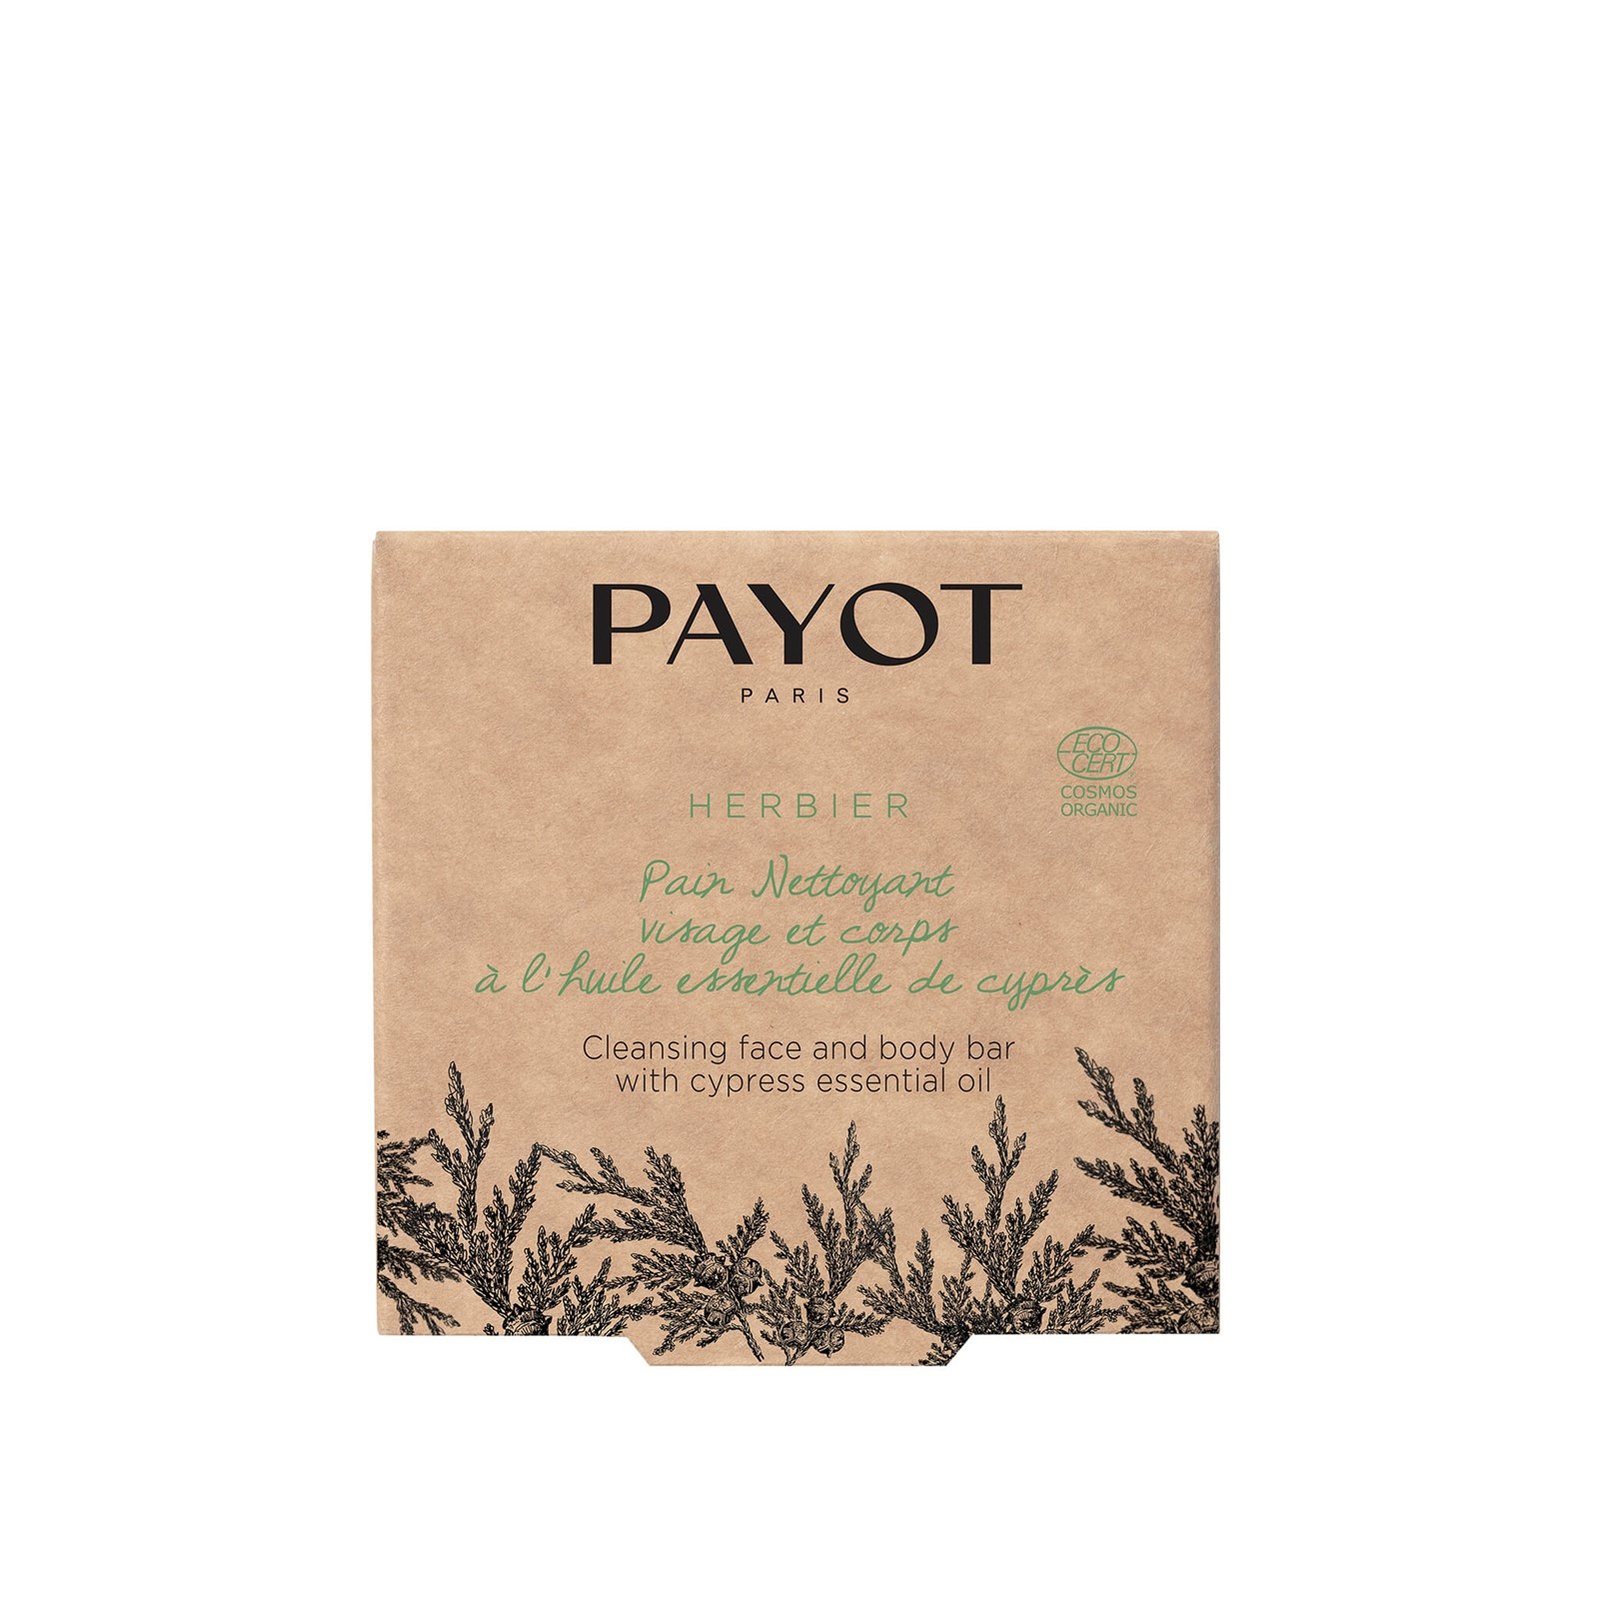 Payot Herbier Cleansing Face And Body Bar With Cypress Essential Oil 85g (2.9 oz)